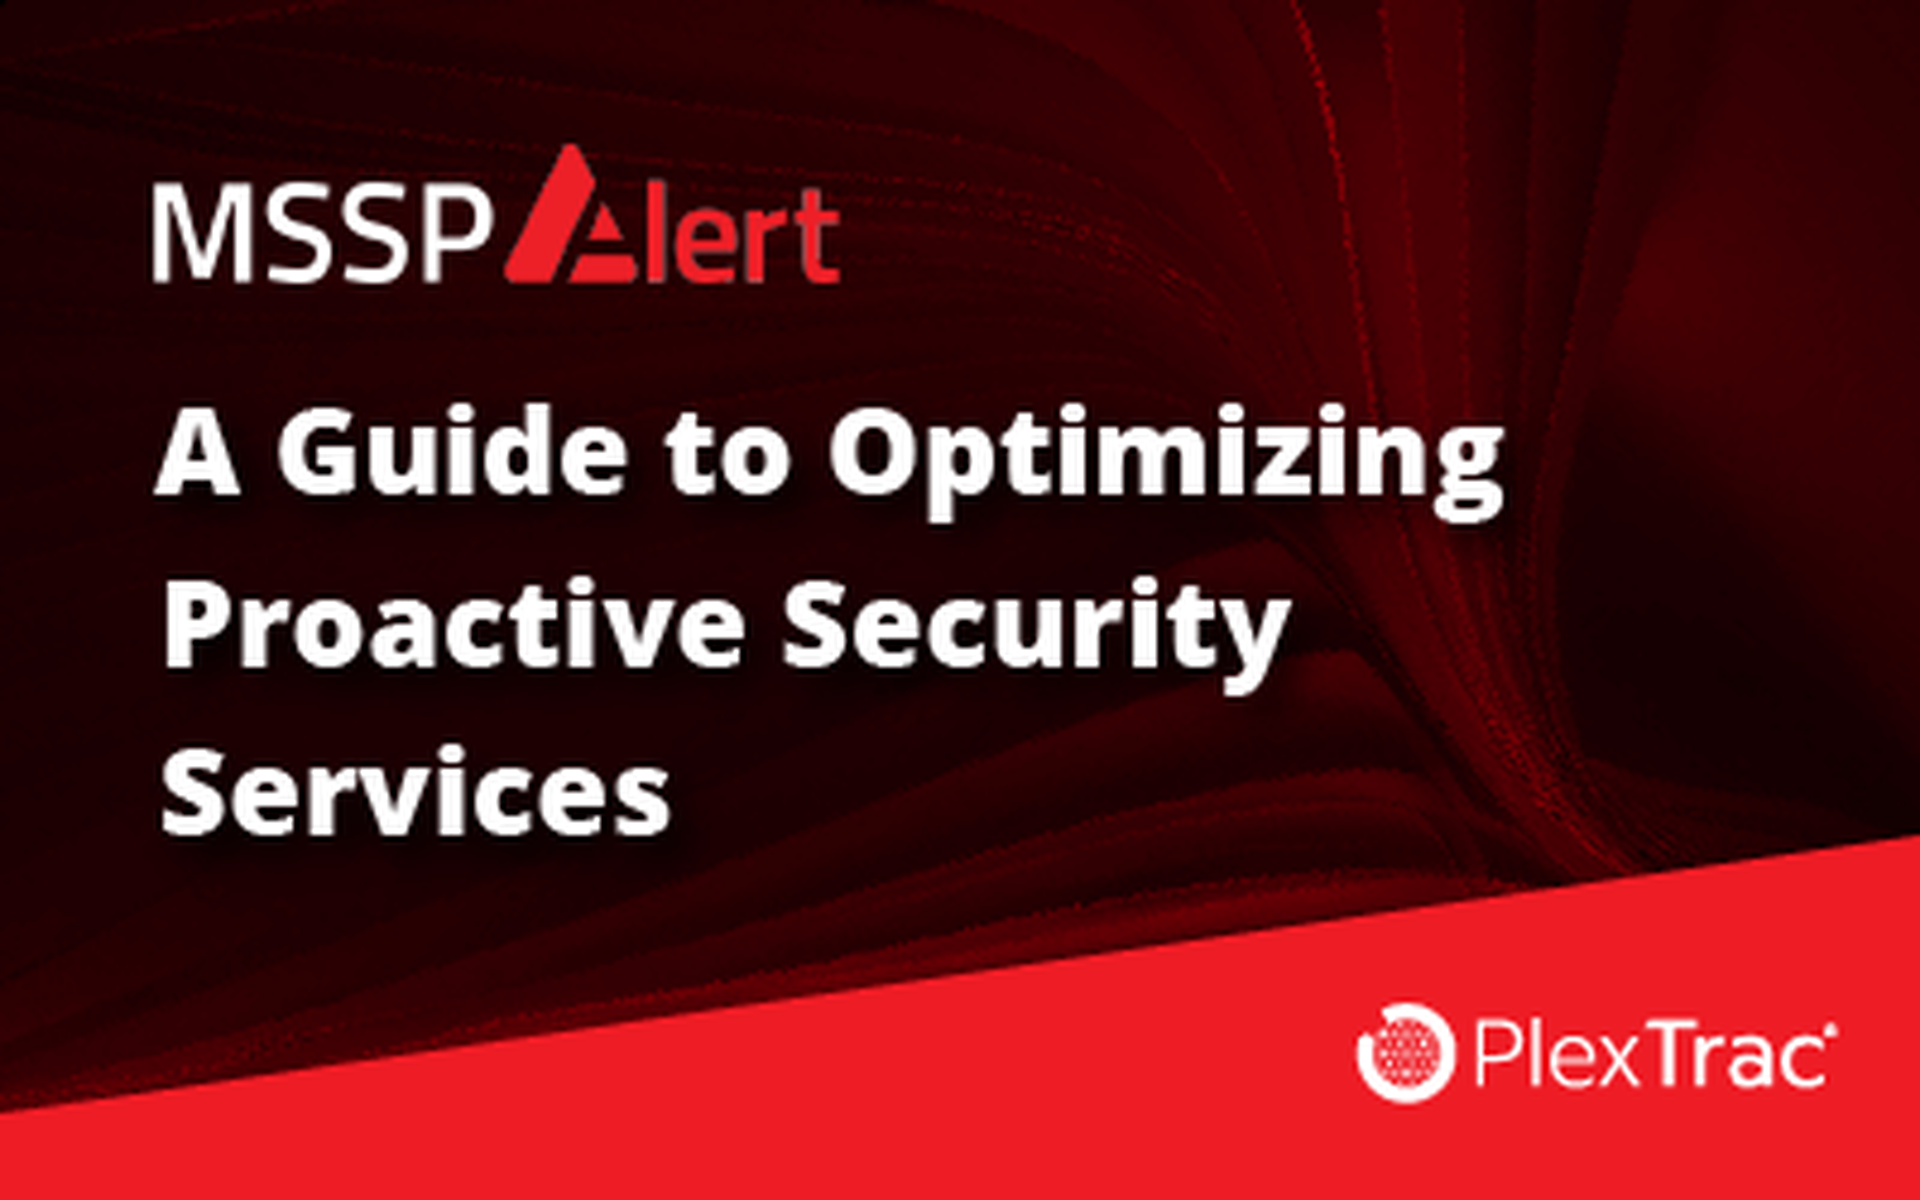 A Guide to Optimizing Proactive Security Services